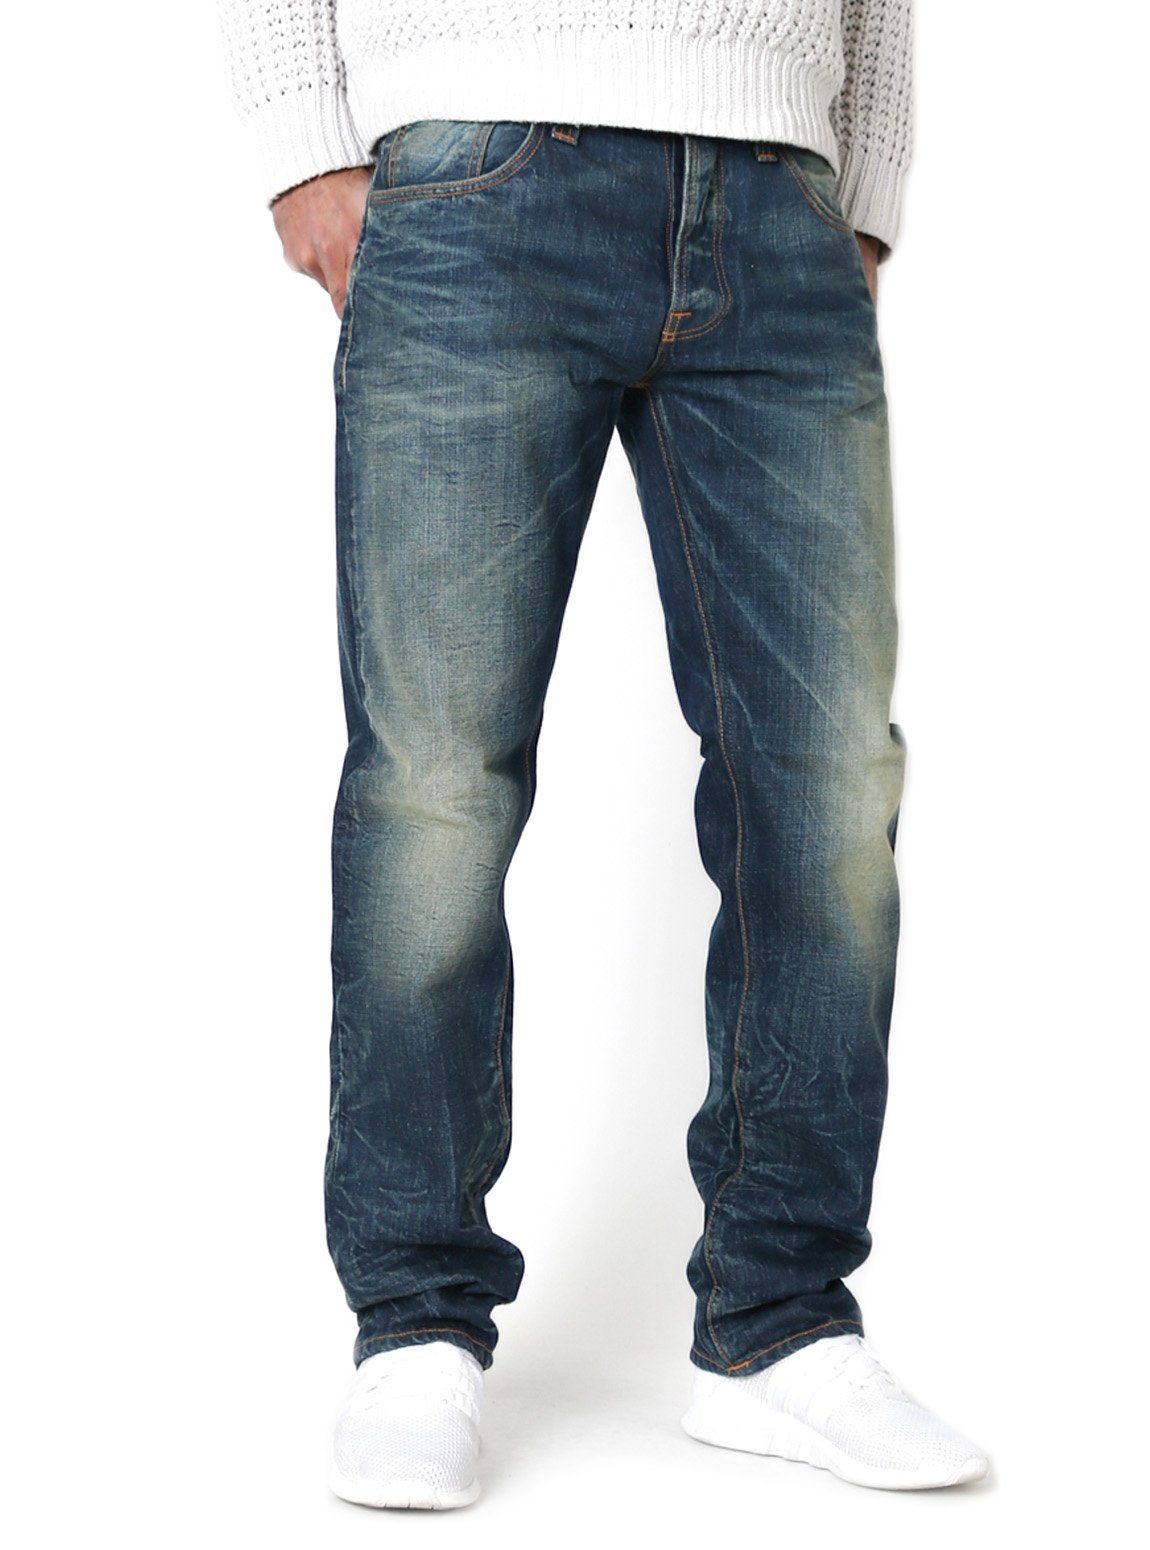 Nudie Jeans Tapered-fit-Jeans Herren Used Look Hose - Sharp Bengt Authentic  Worn online kaufen | OTTO